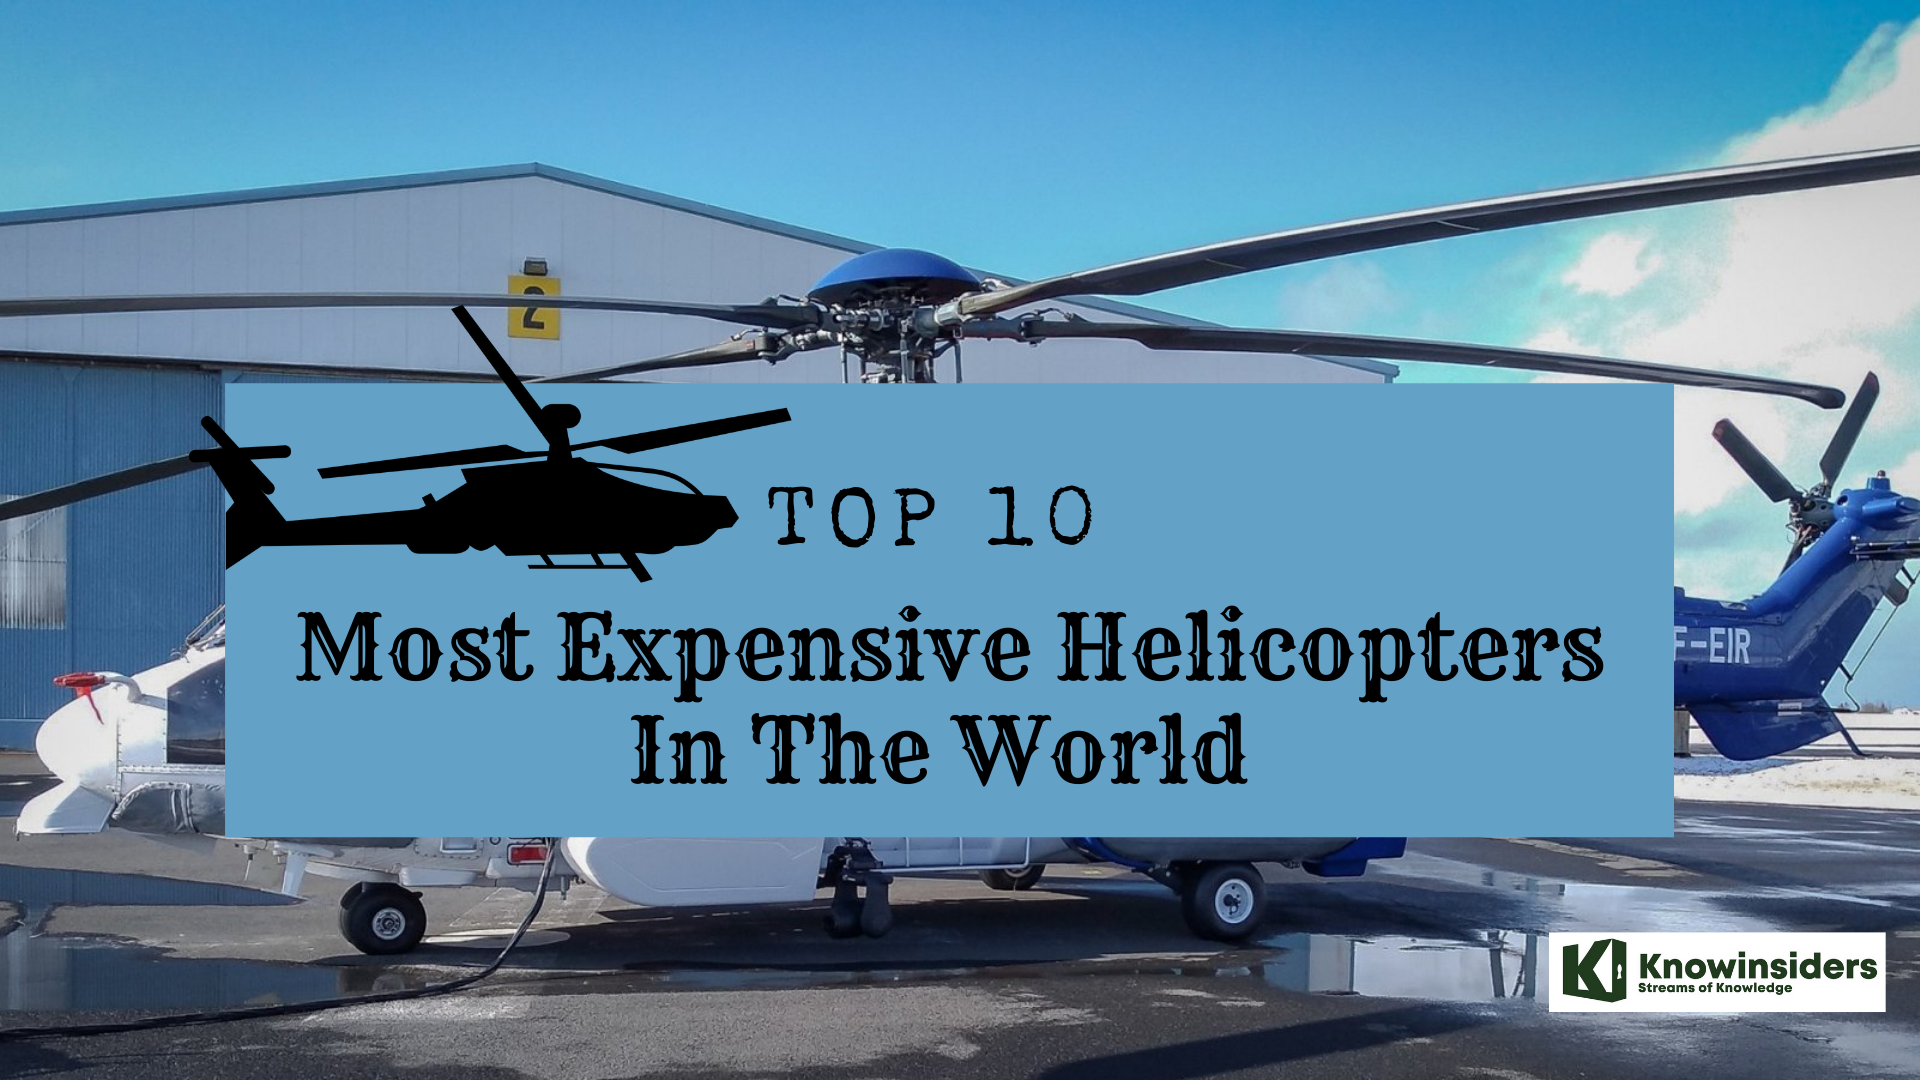 Top 10 most expensive helicopters in the world 